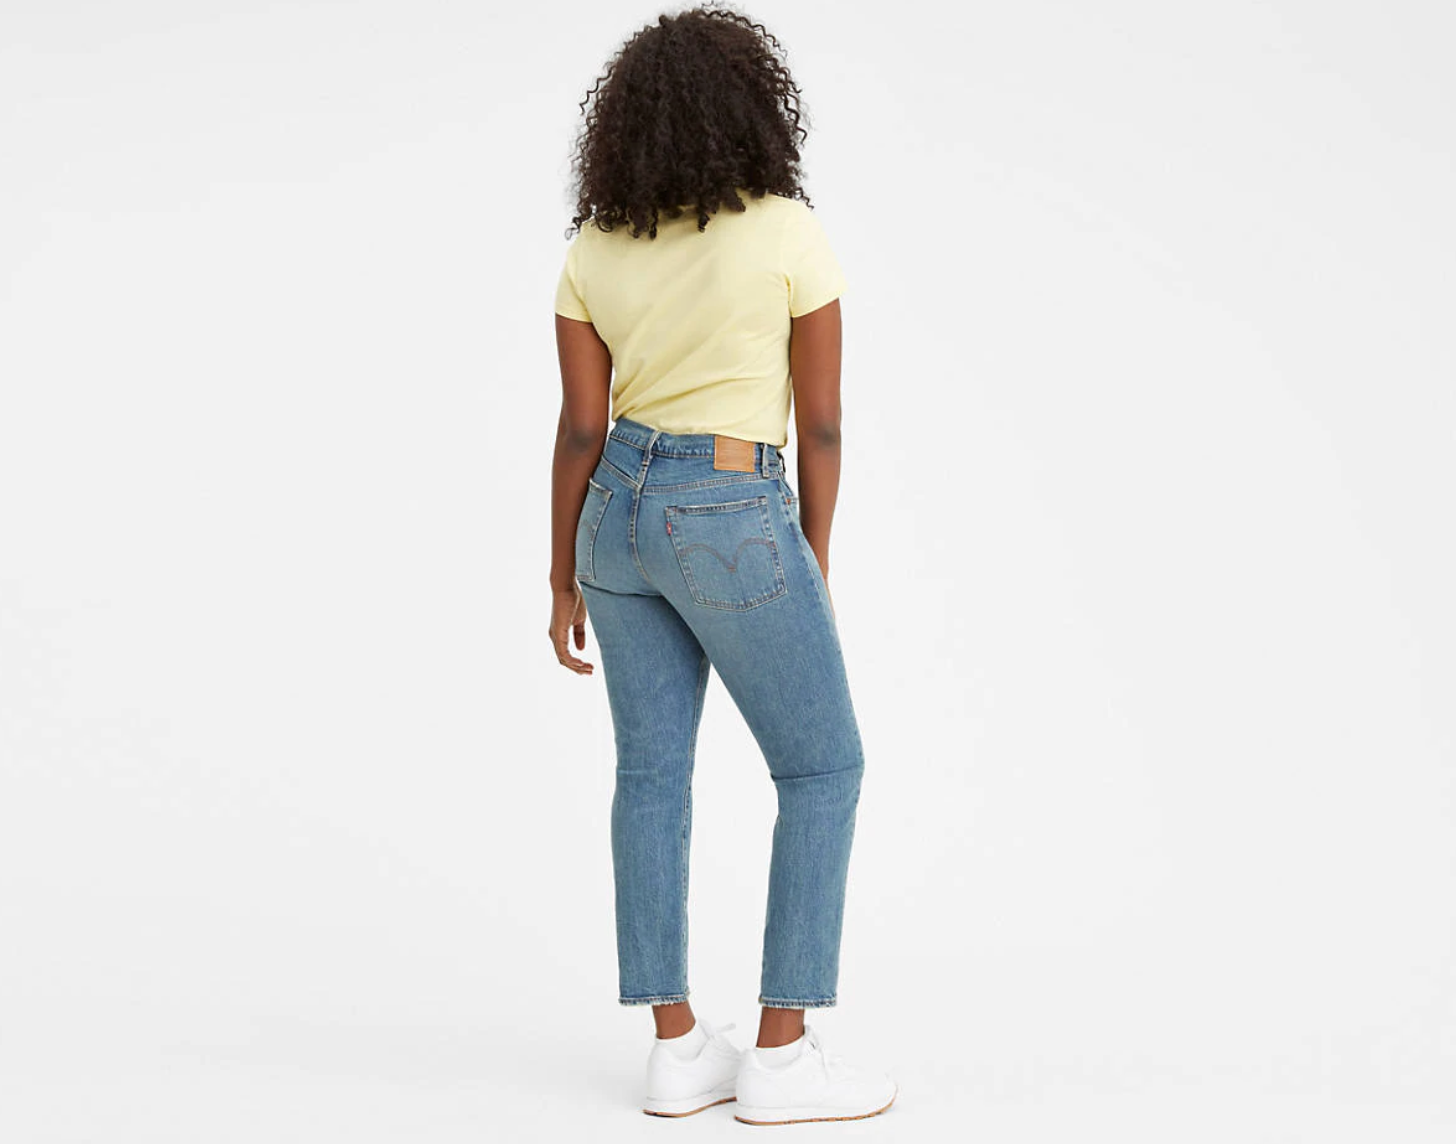 Wedgie Fit Jeans - These Dreams – Good Neighbor